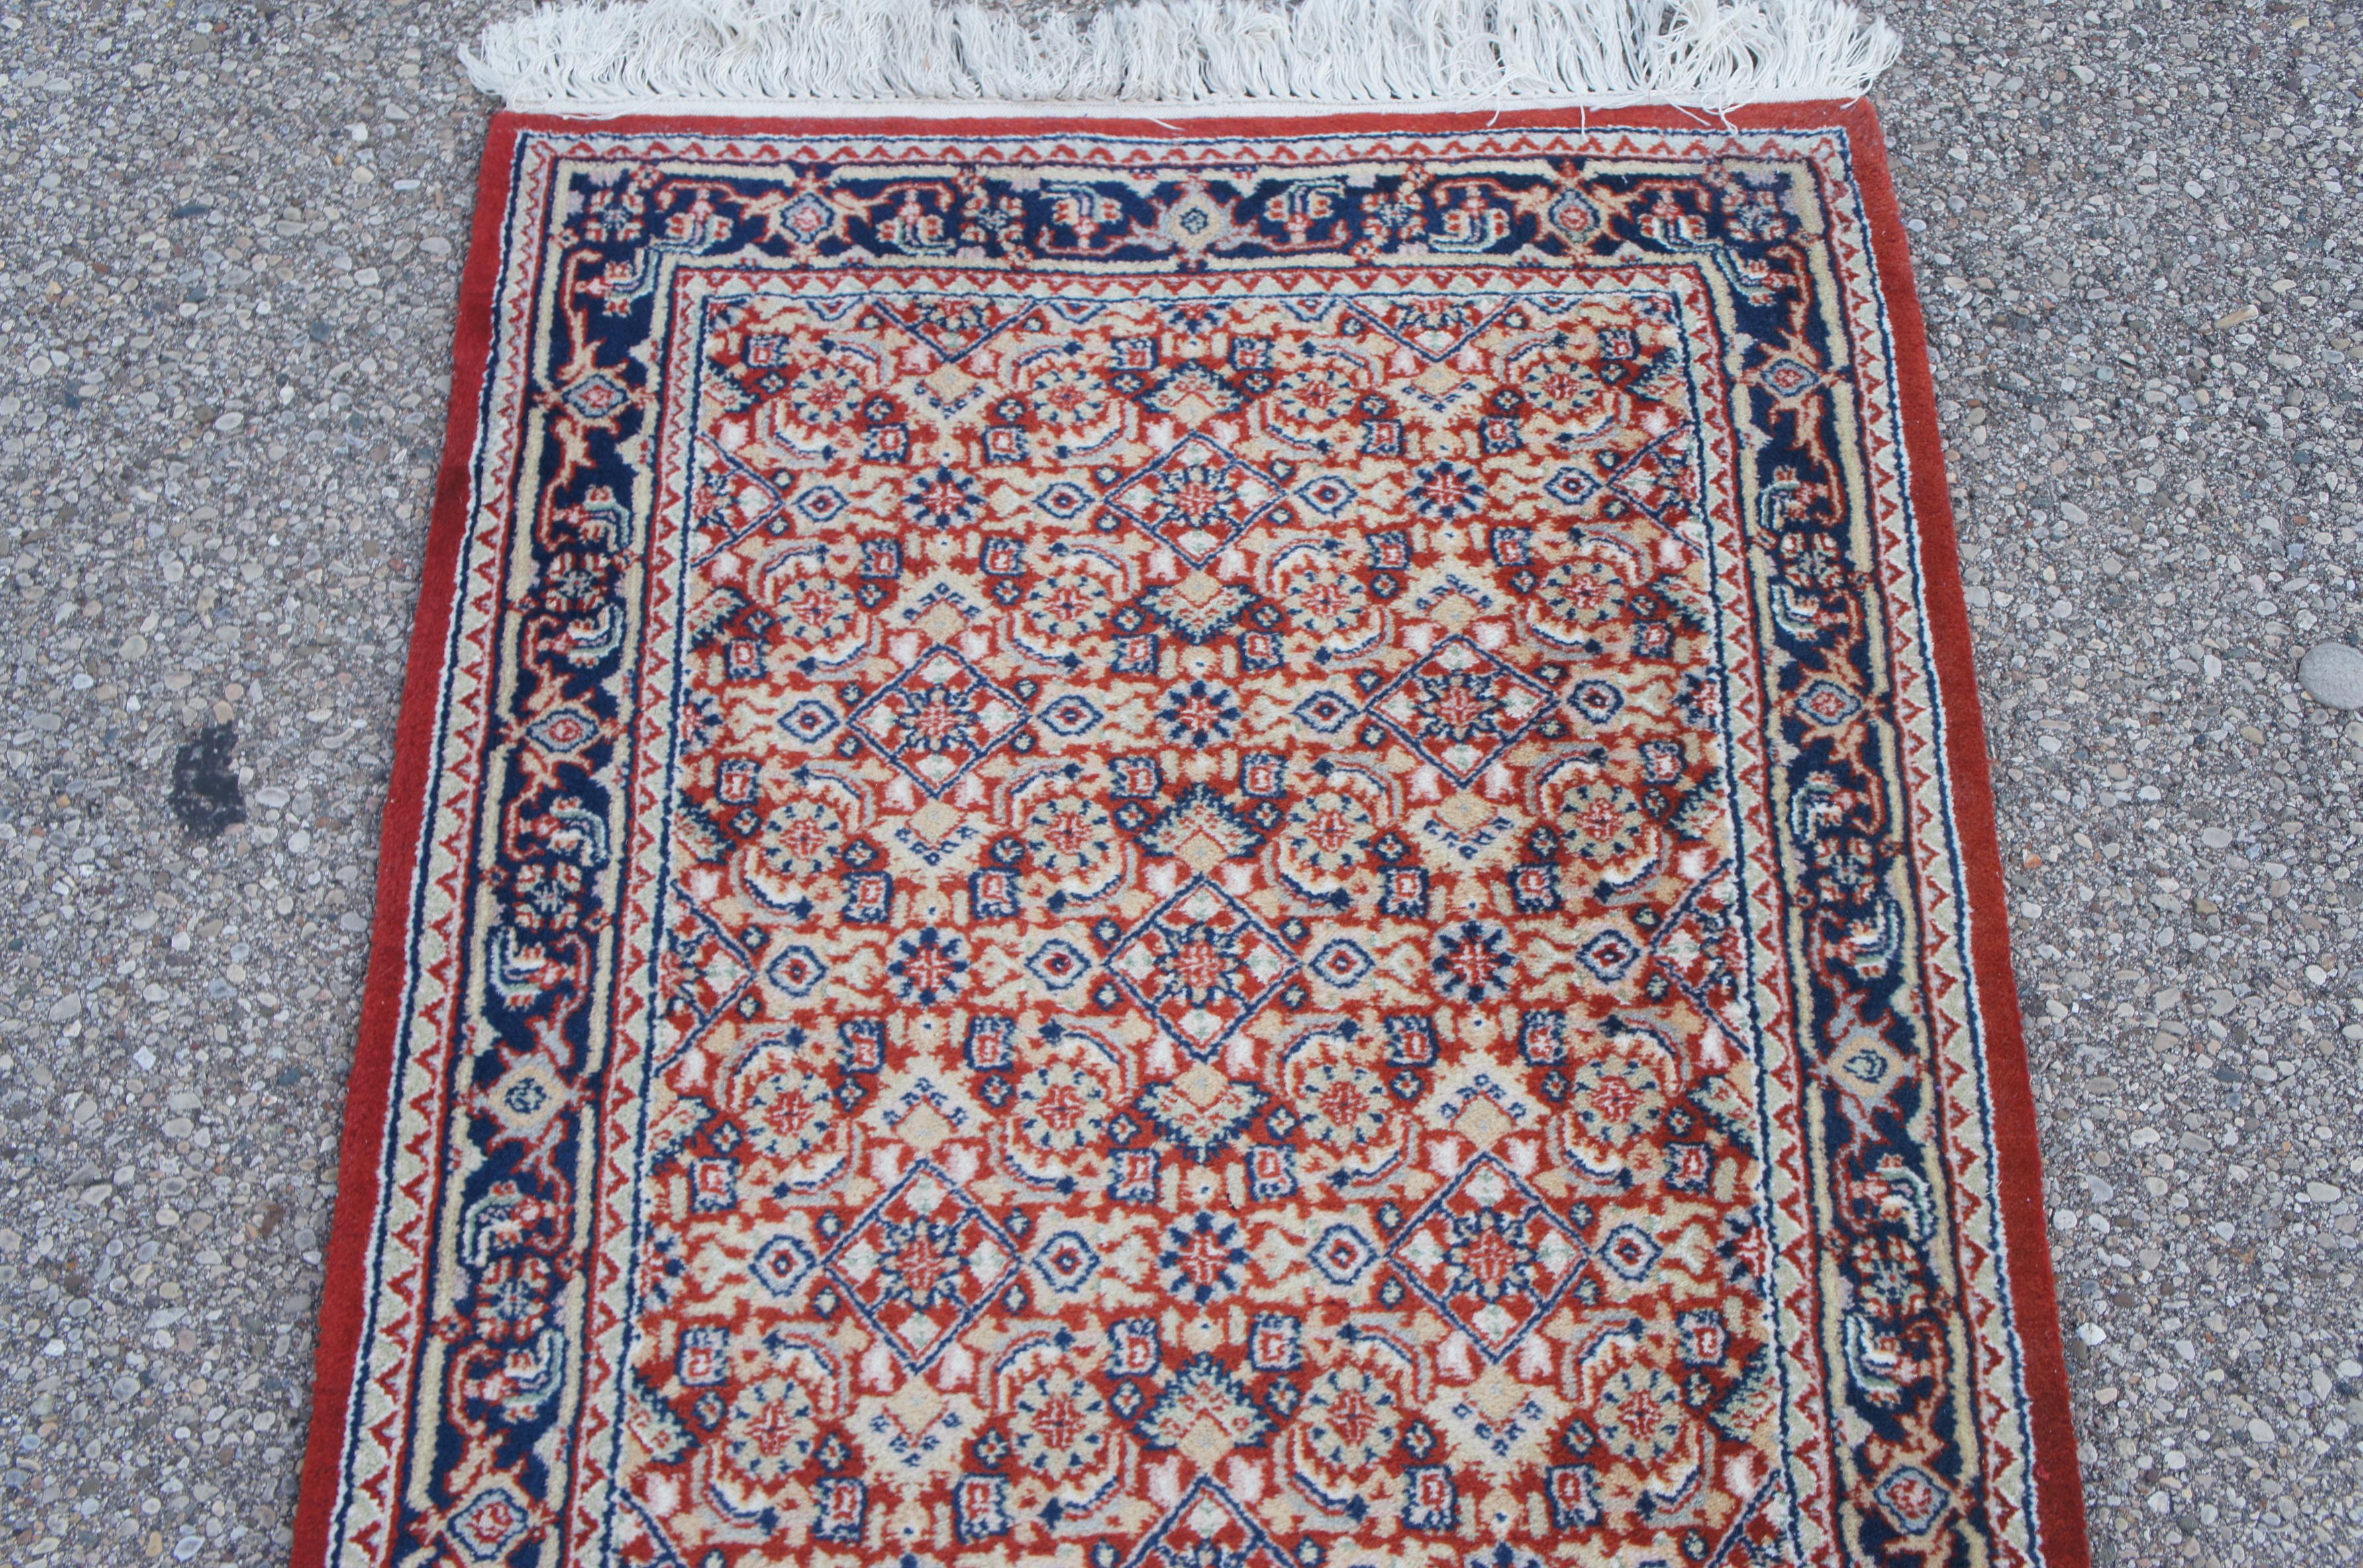 Vintage Indo-Tabriz Hand Knotted Wool Red & Blue Runner Rug 2.5' x 8' For Sale 4